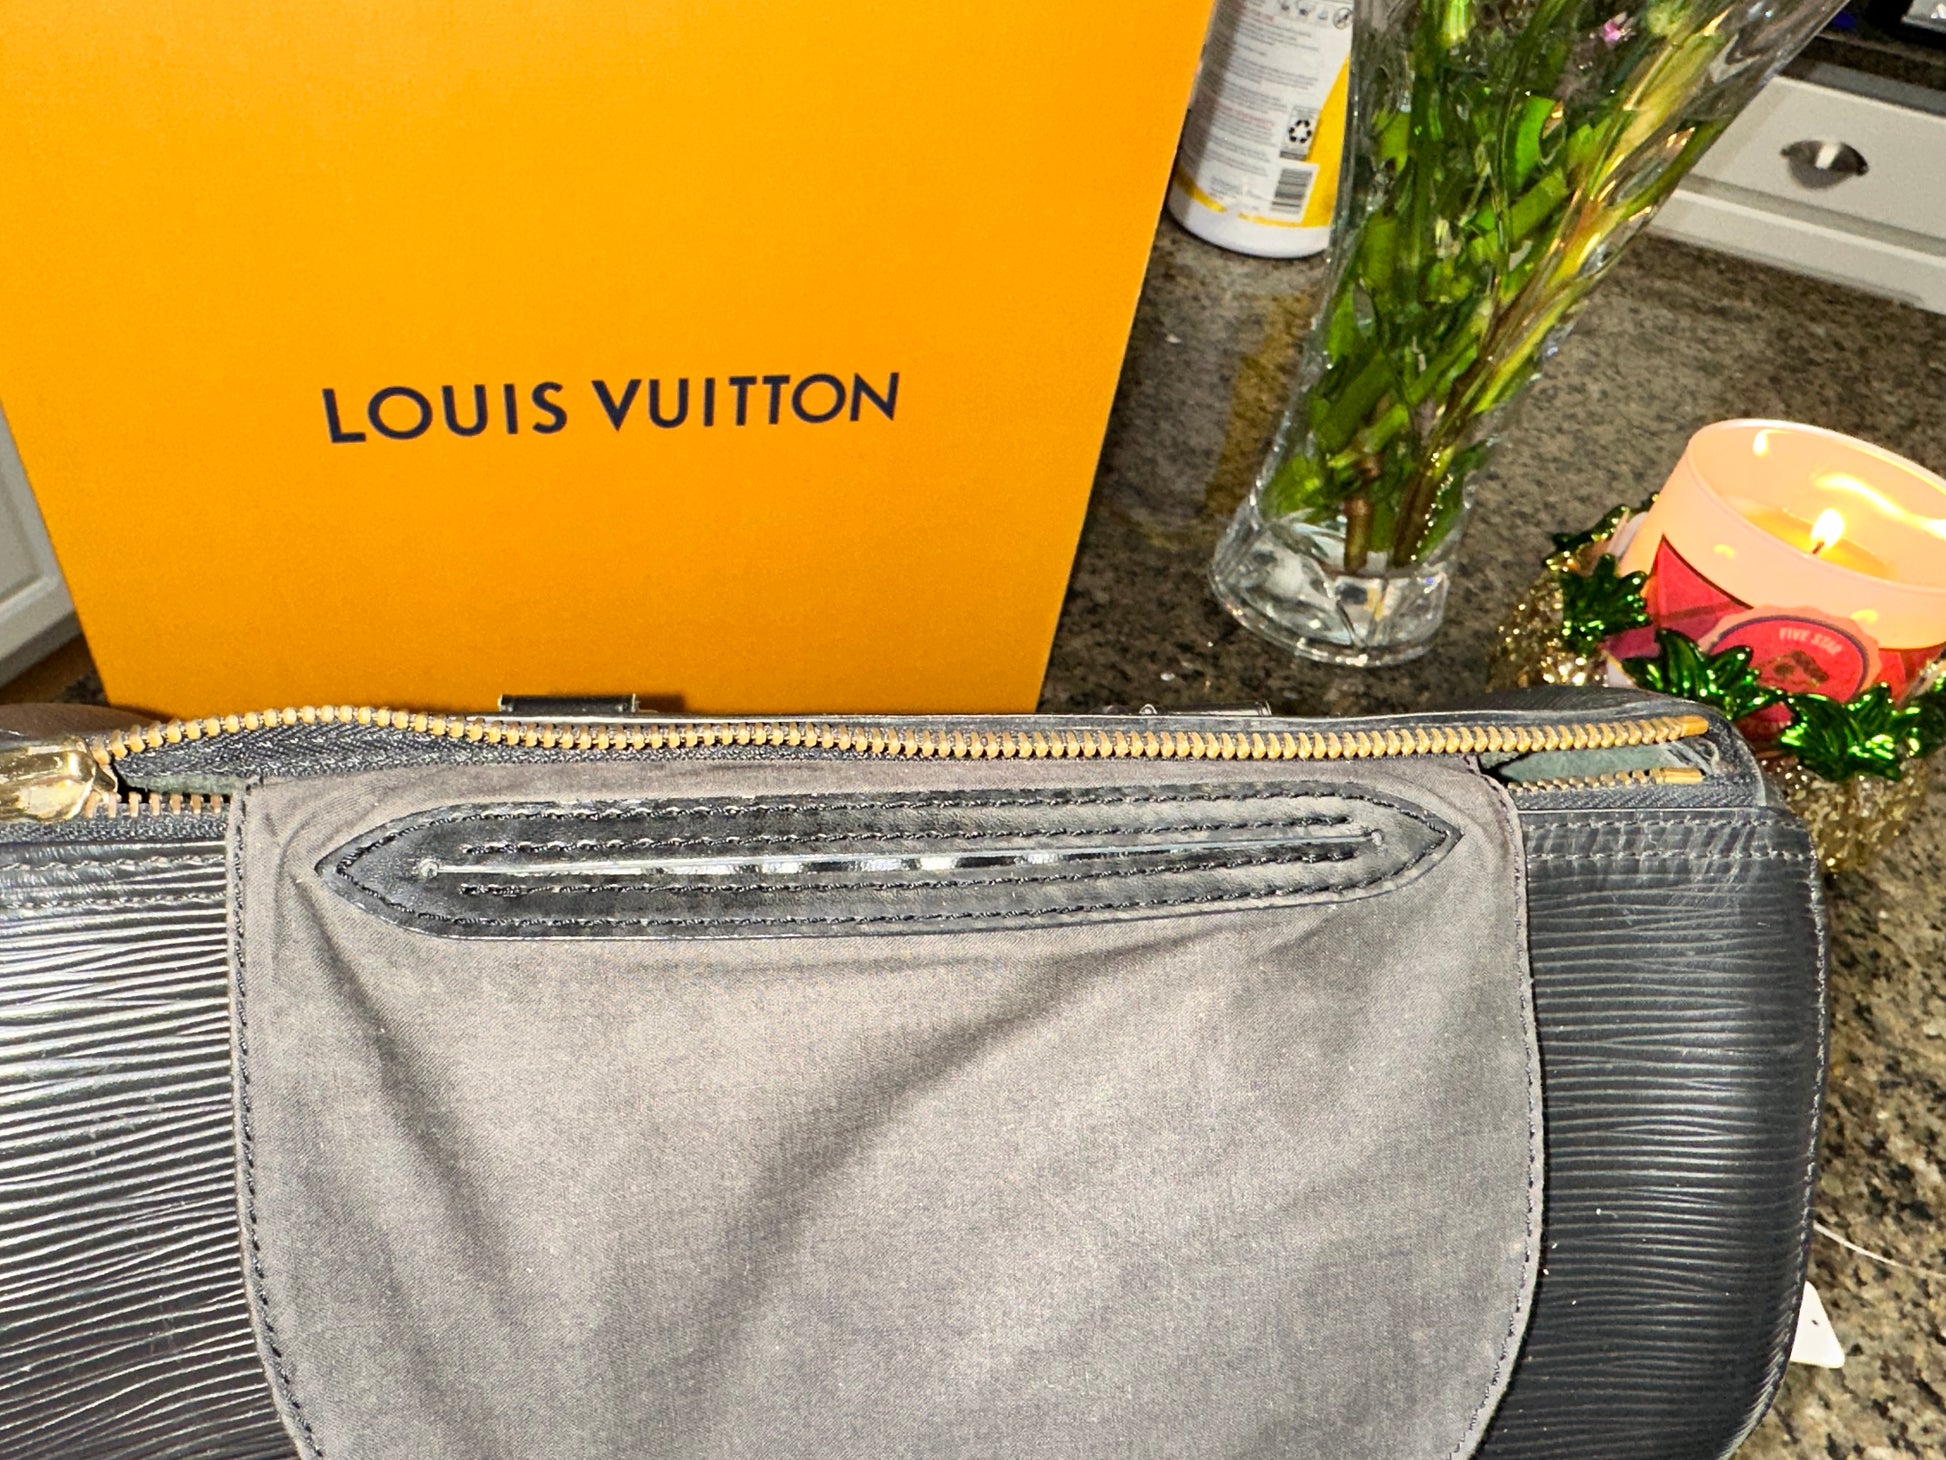 Authentic Preloved Louis Vuitton's